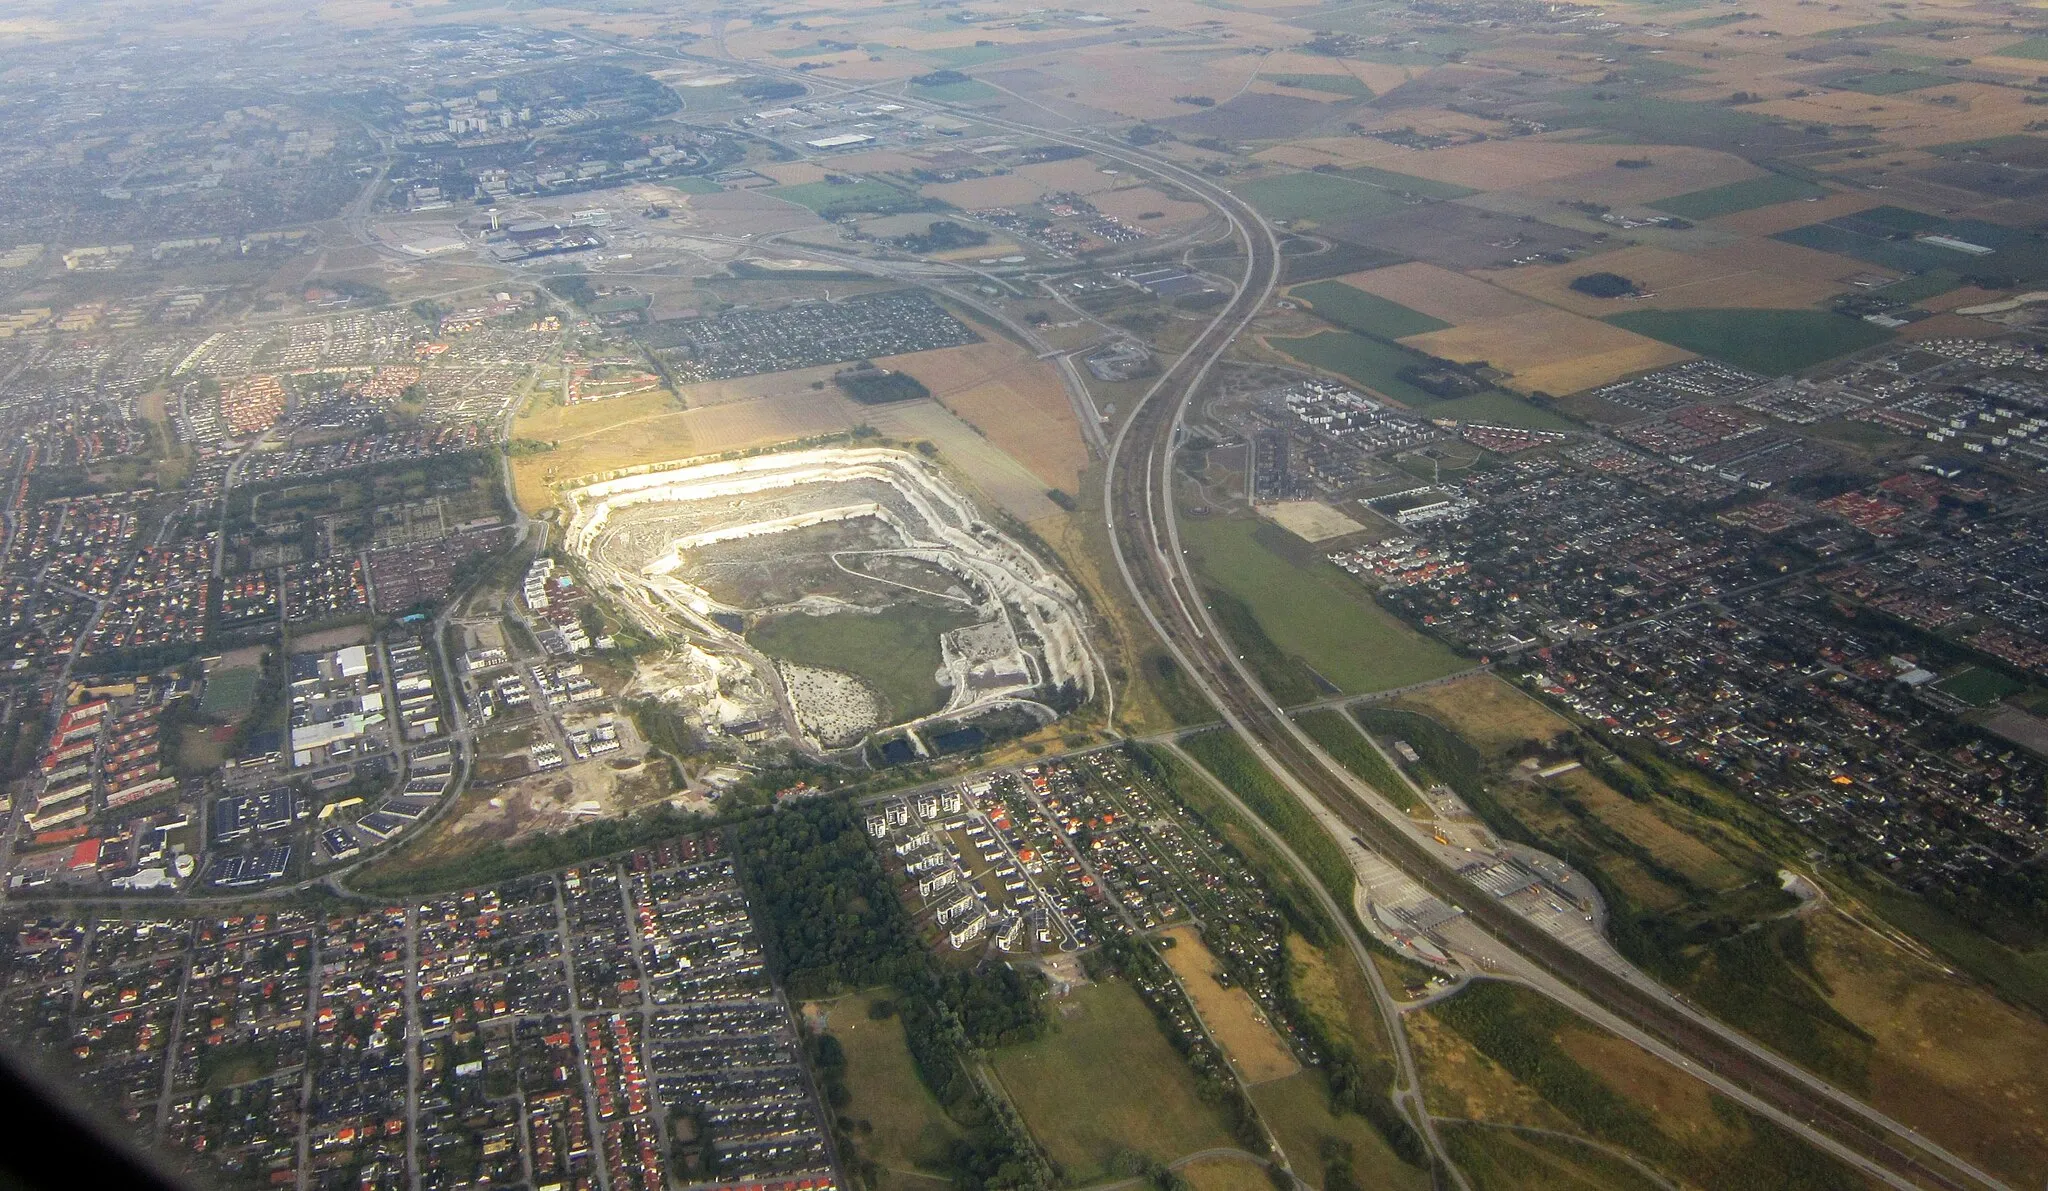 Photo showing: Aerial view of Limhamns kalkbrott. The neighborhood to the left of the motorway (European route E20) is Limhamn, the one to the right is Bunkeflostrand. Toll station for entering Øresund Bridge is visible in the foreground, and Malmö Arena's mushroom-shaped tower -- in the background.